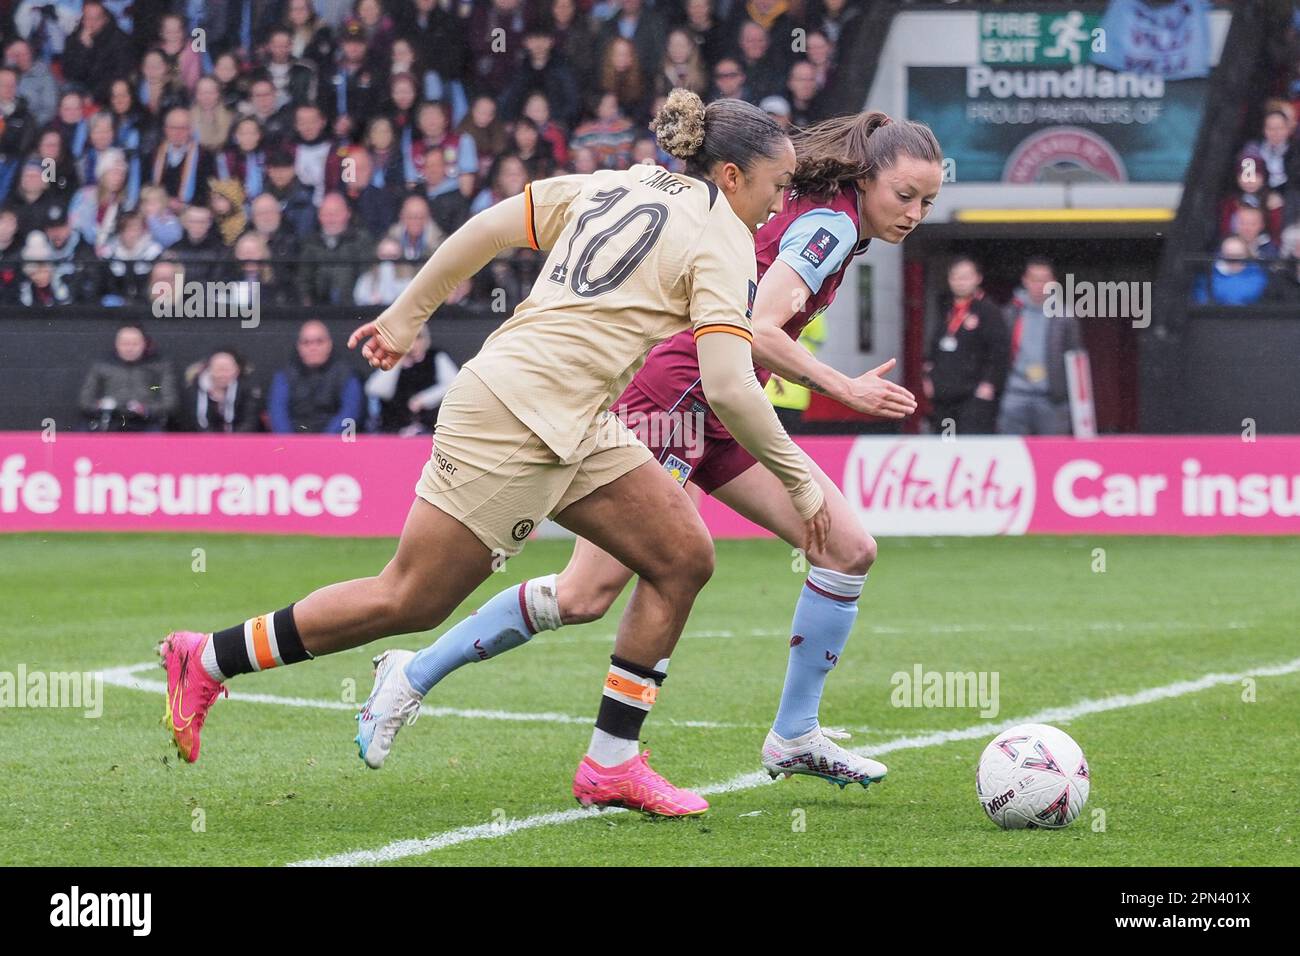 Walsall, UK. 16th Apr, 2023. Lauren James (10 Chelsea) and Danielle Turner (14 Aston Villa) battle for the ball during the Womens FA Cup semi final match between Aston Villa and Chelsea at Bescot Stadium in Walsall, England (Natalie Mincher/SPP) Credit: SPP Sport Press Photo. /Alamy Live News Stock Photo